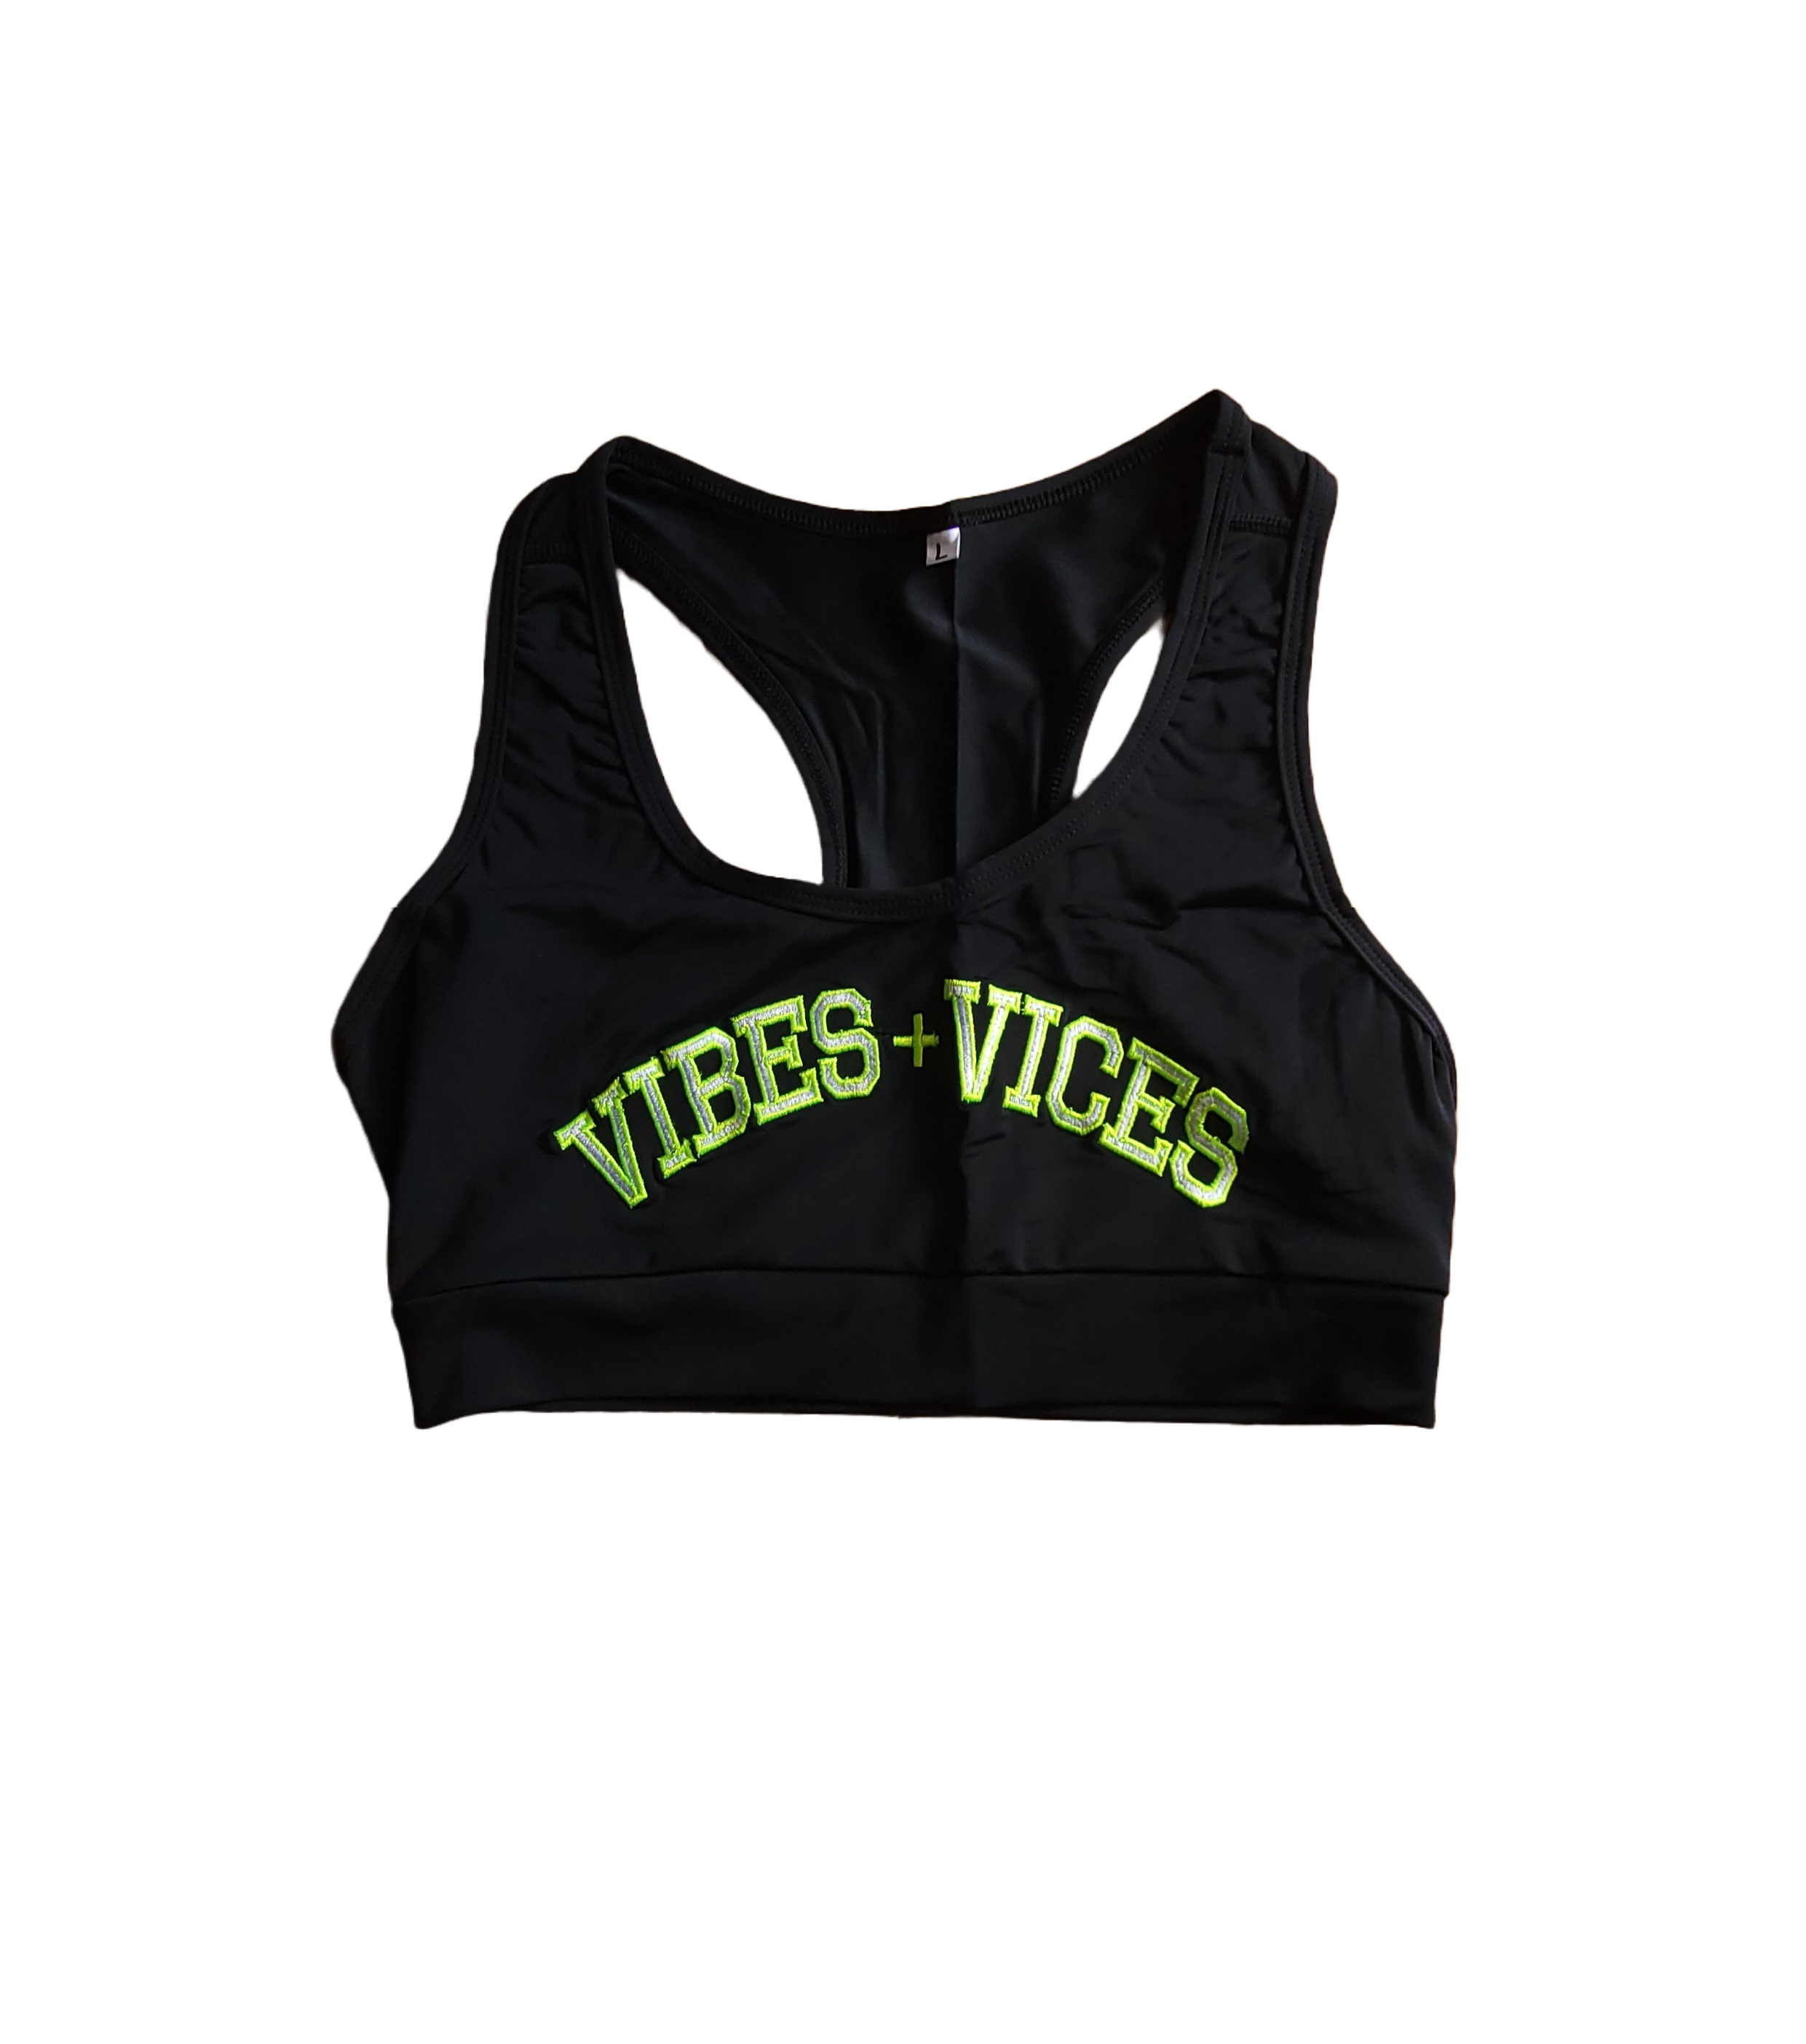 Vibes and Vices Sports Bra Sports Bra Small / Pink/Neon,Small / Bulls,Small / White/Neon,Small / Black/Neon,Medium / Pink/Neon,Medium / Bulls,Medium / White/Neon,Medium / Black/Neon,Large / Pink/Neon,Large / Bulls,Large / White/Neon,Large / Black/Neon,X-Large / Pink/Neon,X-Large / Bulls,X-Large / White/Neon,X-Large / Black/Neon,2X-Large / Pink/Neon,2X-Large / Bulls,2X-Large / White/Neon,2X-Large / Black/Neon,3X-Large / Pink/Neon,3X-Large / Bulls,3X-Large / White/Neon,3X-Large / Black/Neon Black